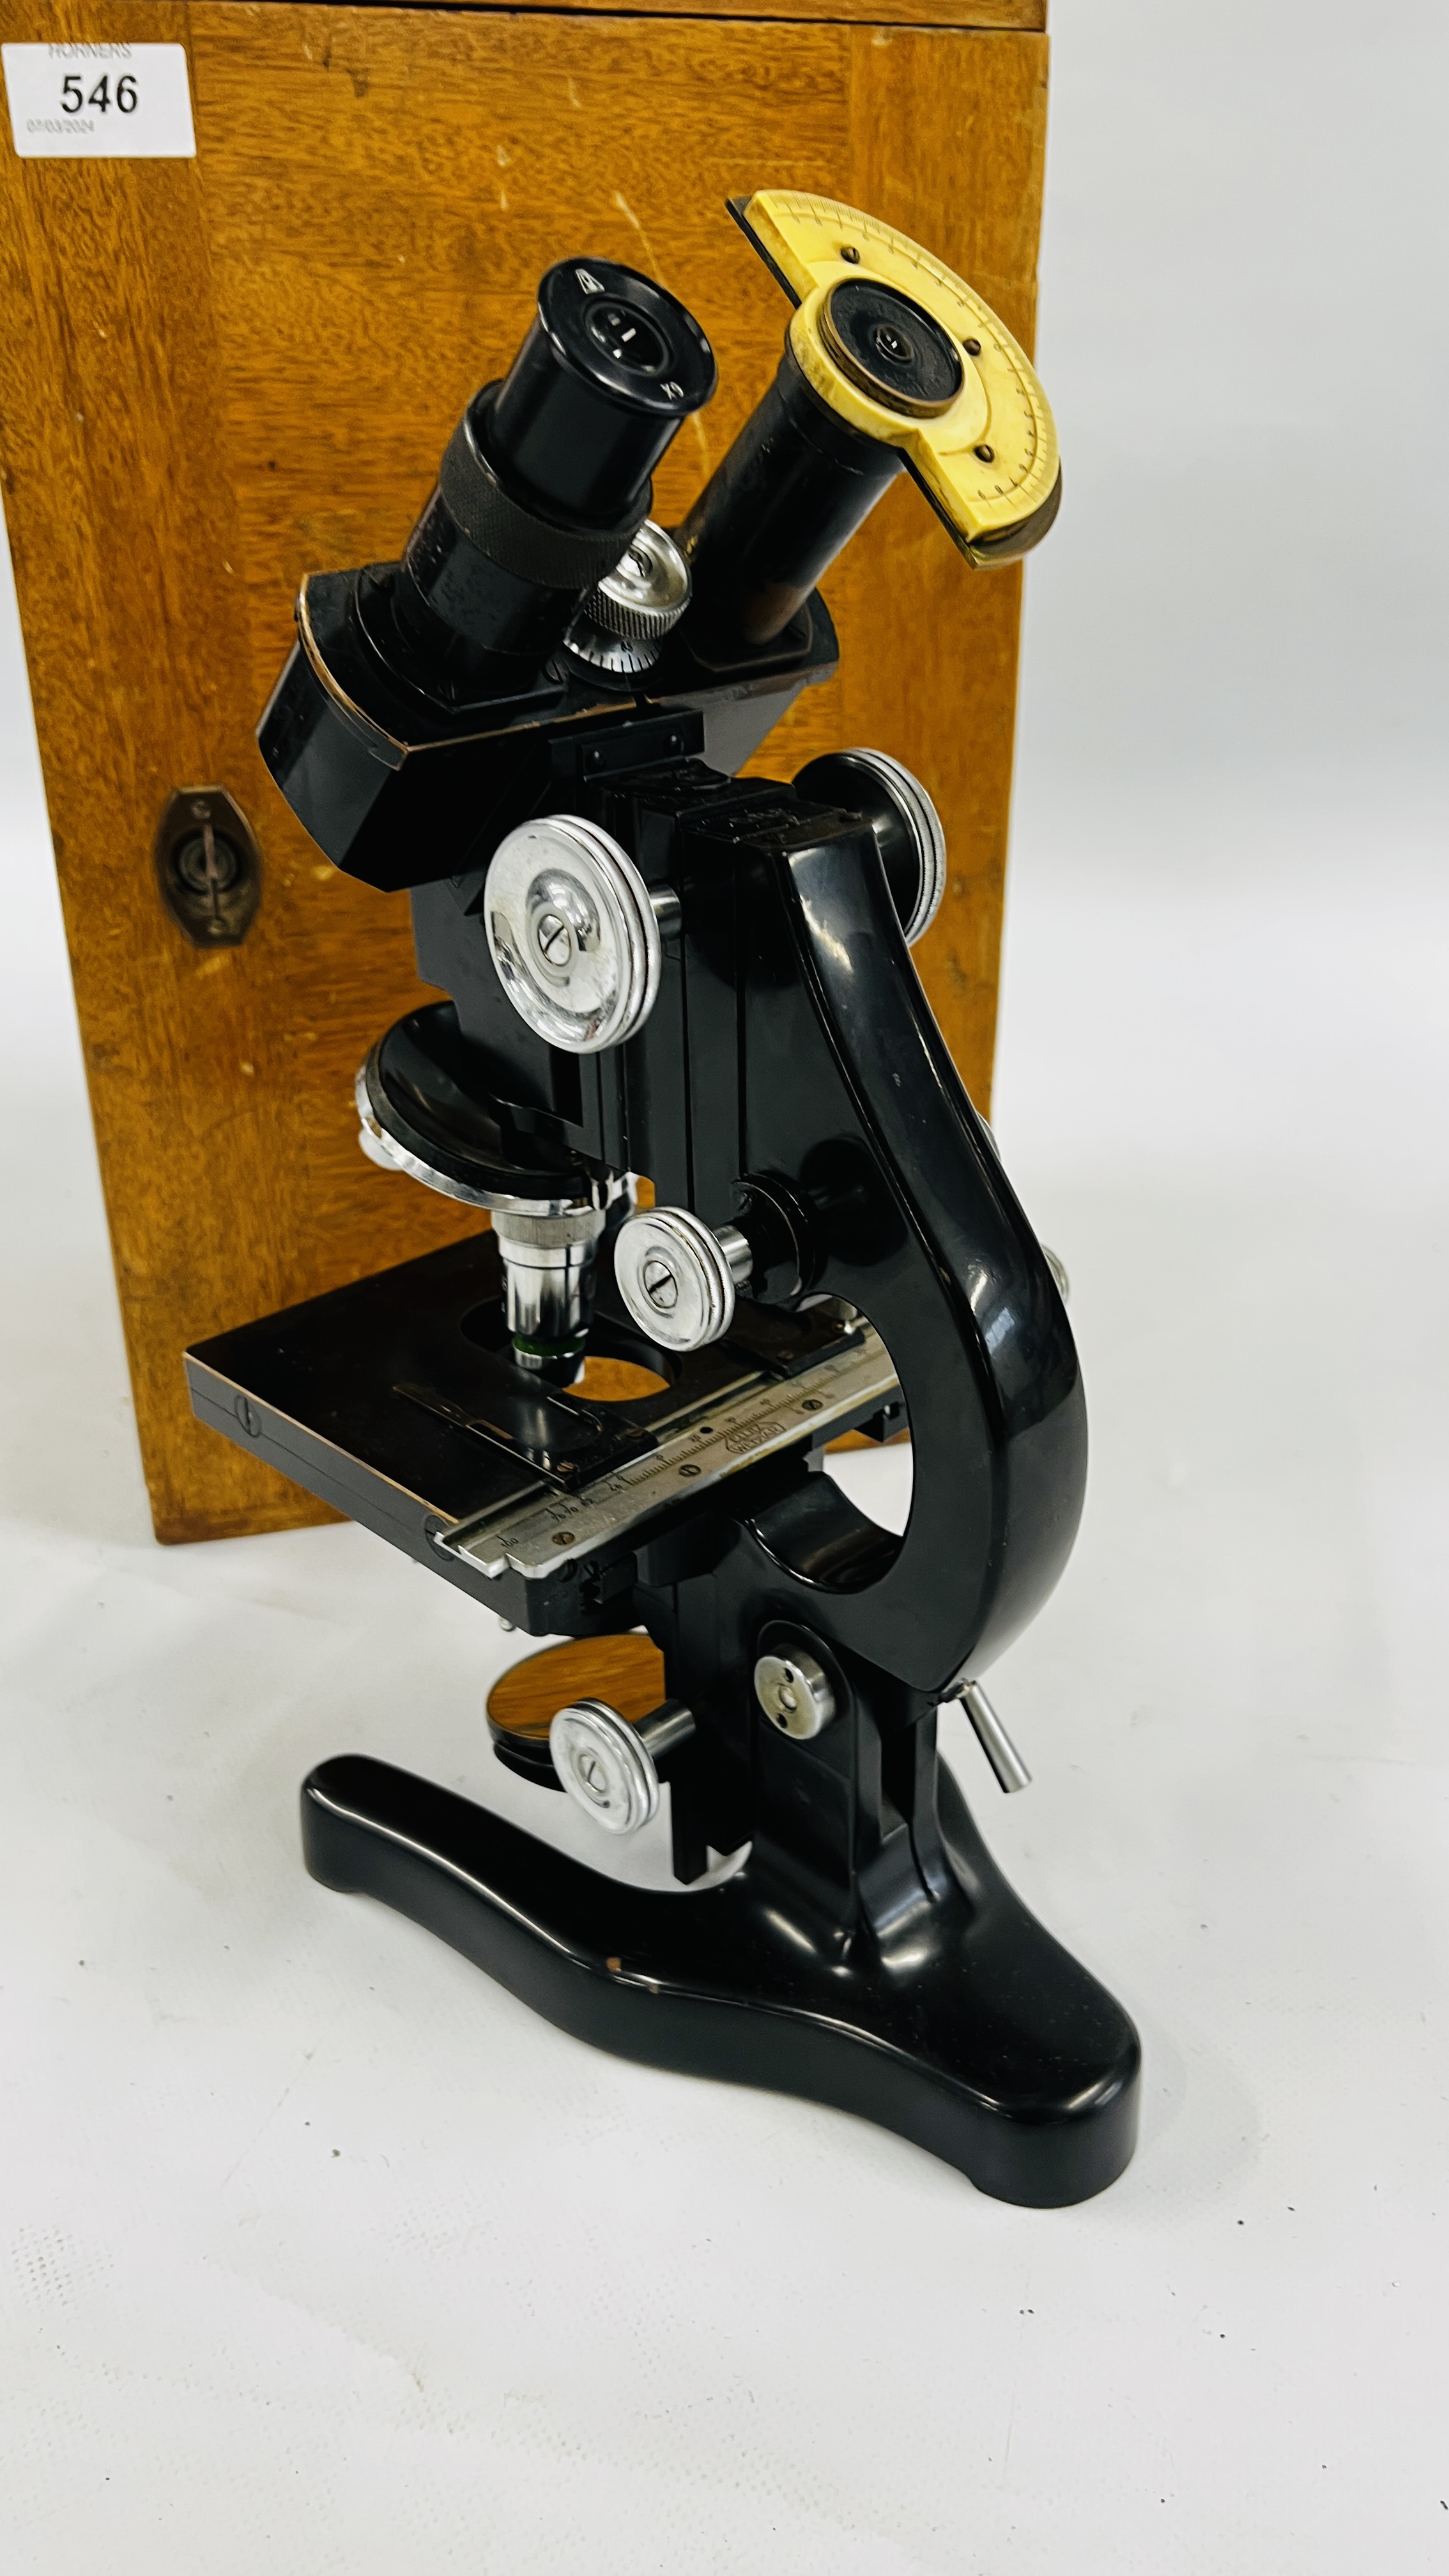 A VINTAGE CASED MICROSCOPE MARKED "WETZLAR" - W 26 X D 25.5 X H 40CM. - Image 4 of 7